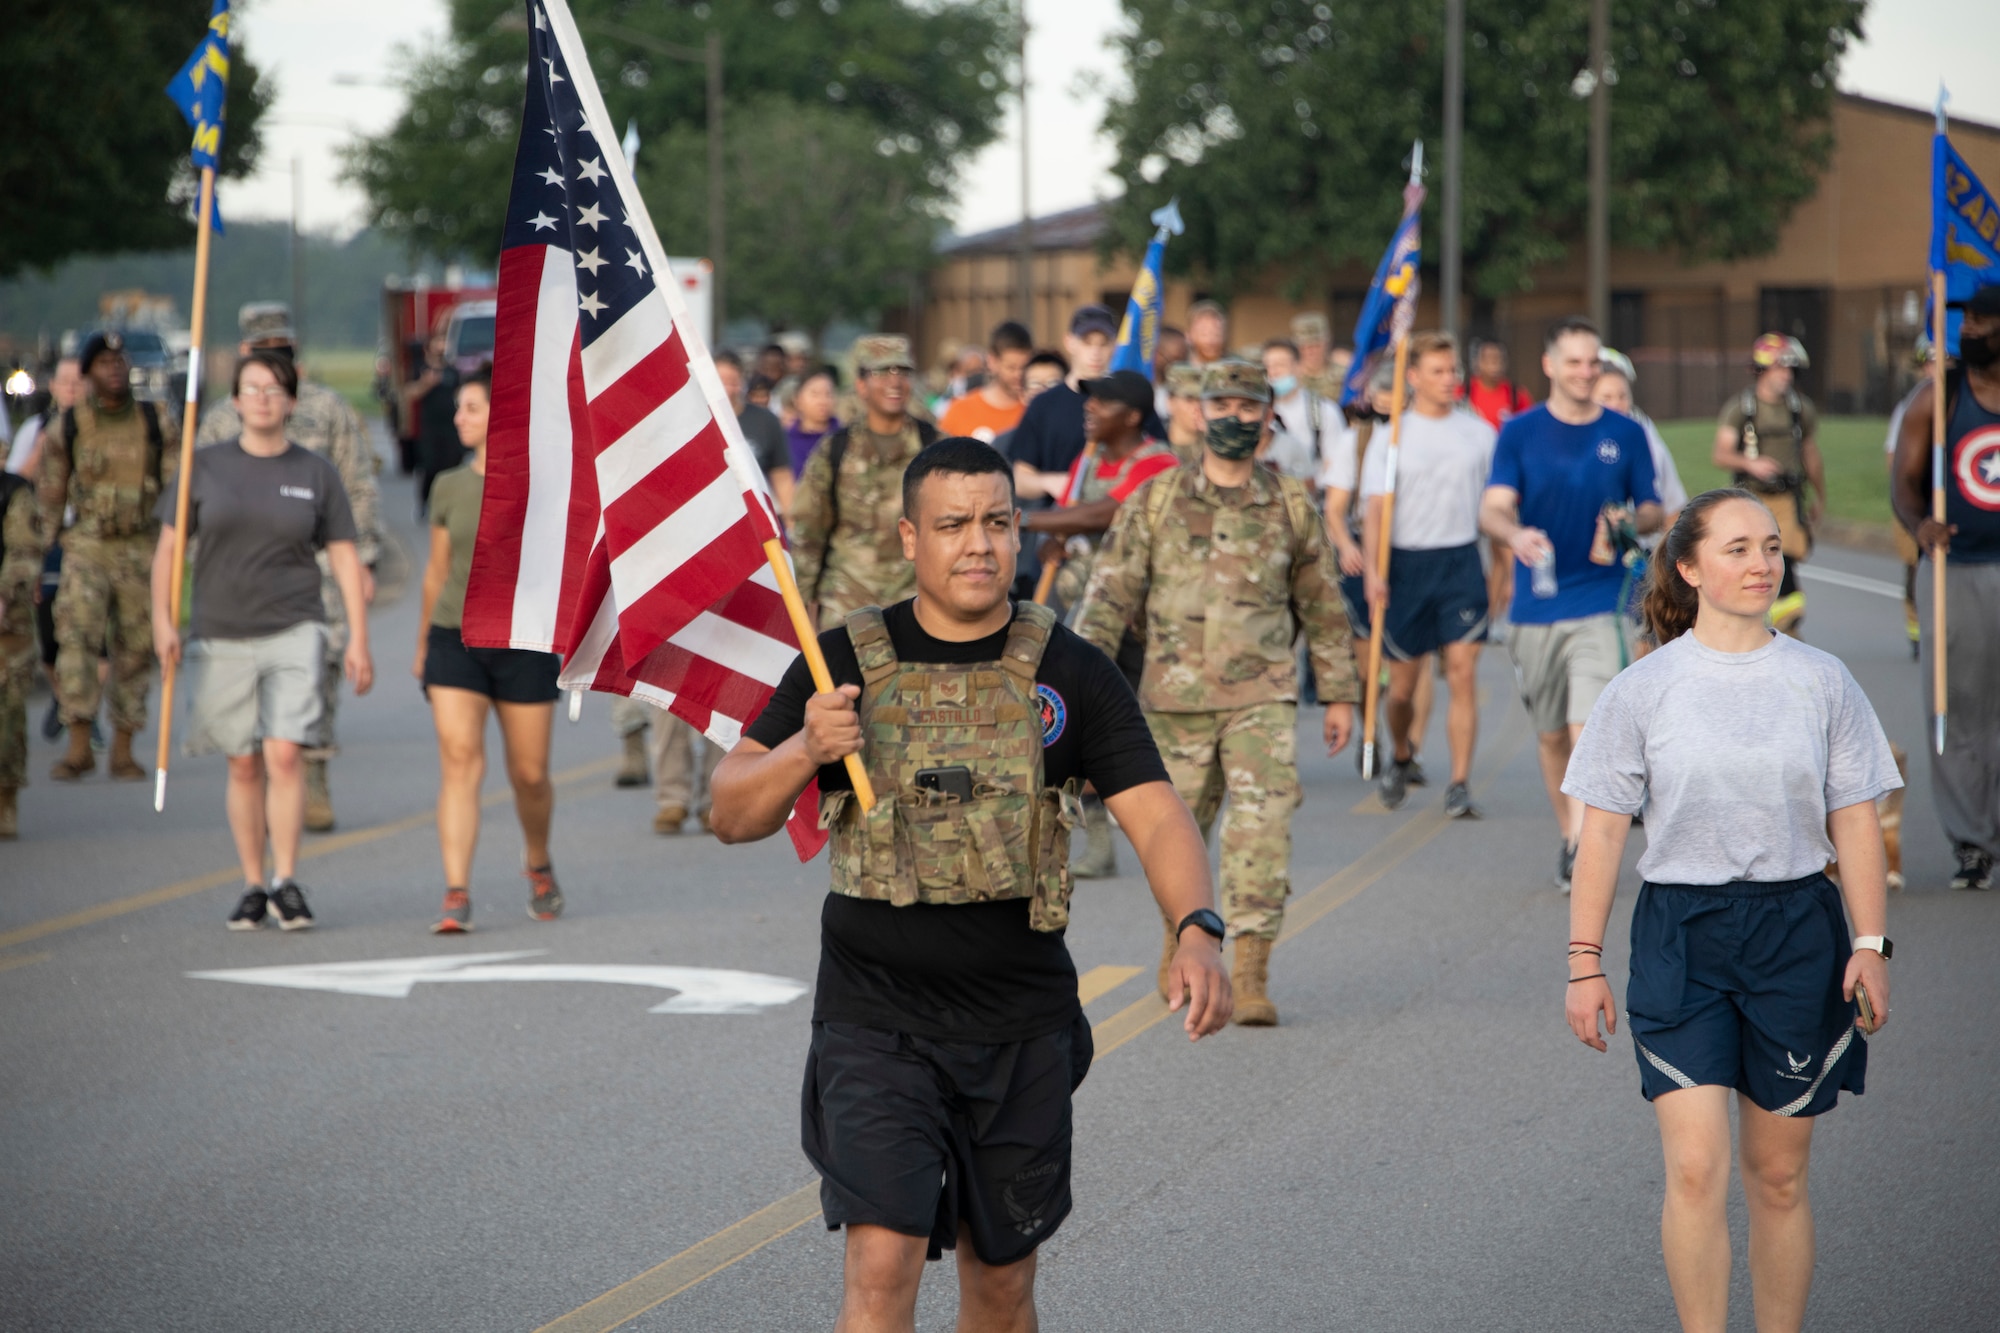 Members of the Maxwell-Gunter community participate in a ruck march in remembrance of 9/11, Sept. 11, 2020, on Maxwell Air Force Base, Alabama. The ruck march ended at the base fire department, where Lt. Gen. James Hecker, Air University commander and president, shared words with all those in attendance. (U.S. Air Force photo by Airman 1st Class Jackson Manske)